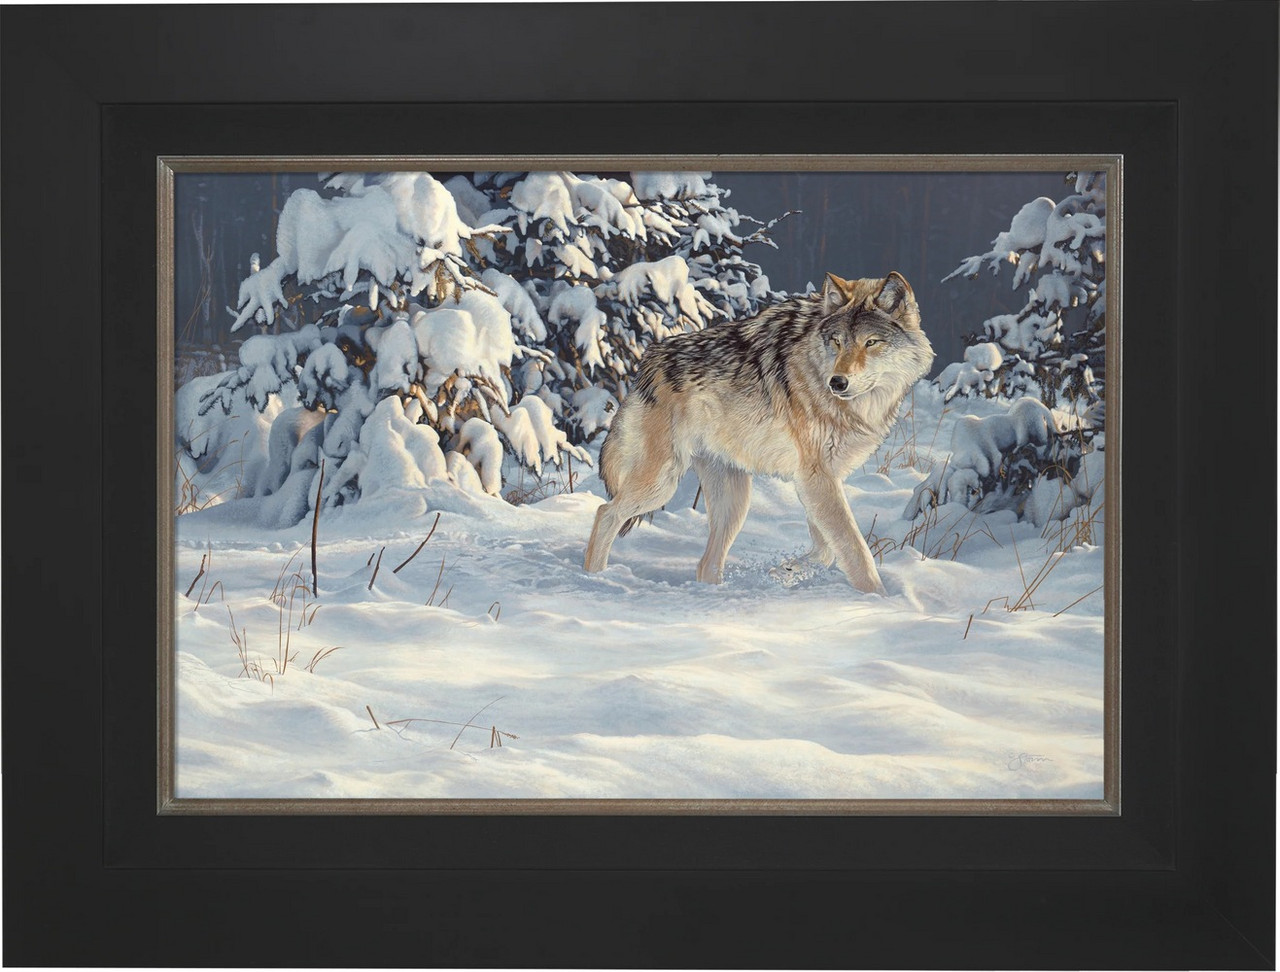 Winter Stroll Framed Original Painting on Canvas by Scot Storm